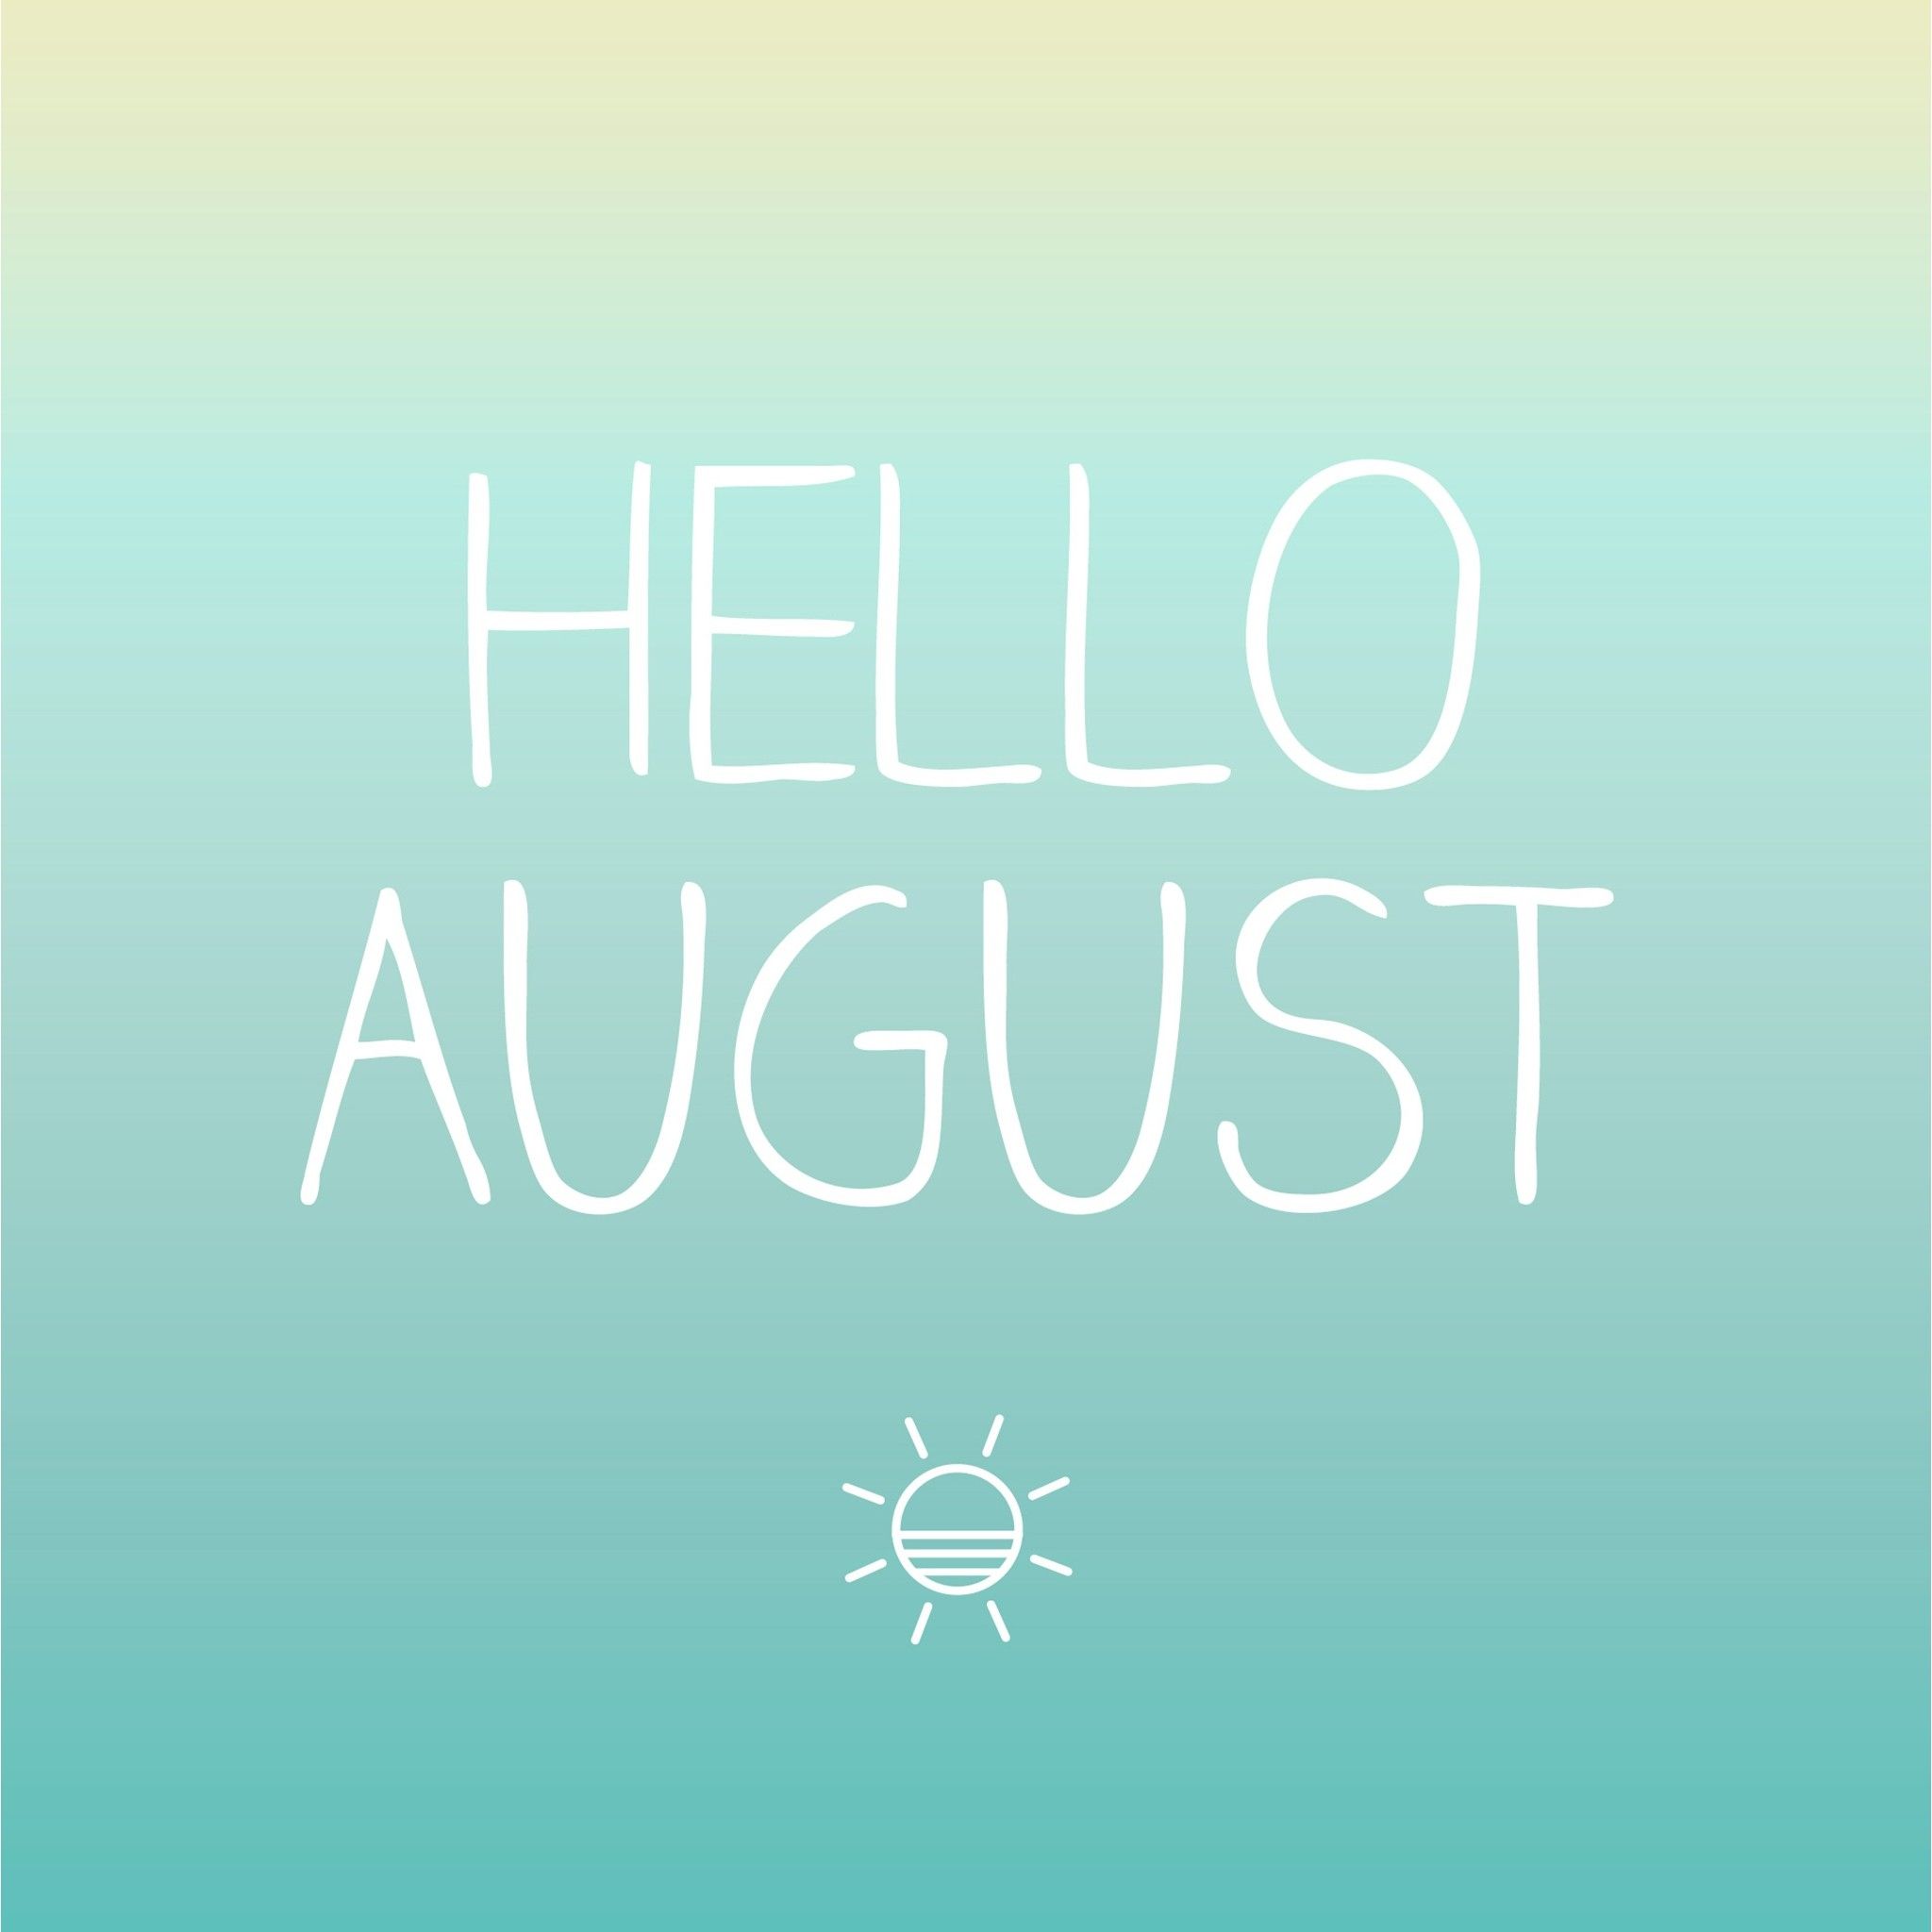 Hello August to see more August wallpaper!